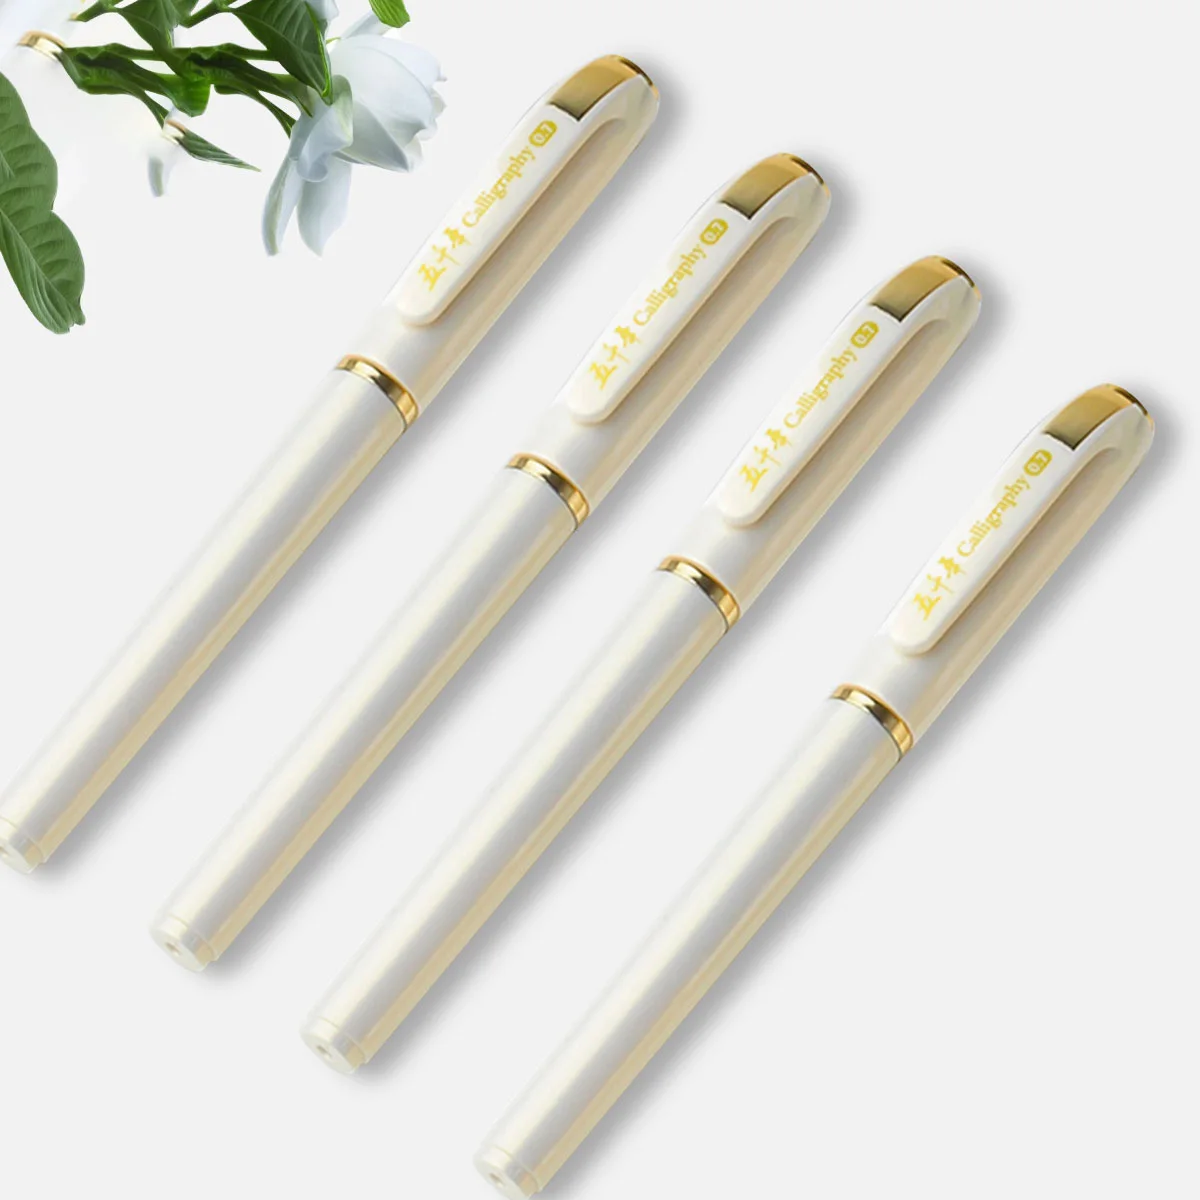 3/6pcs Not erasable Write smoothly white Gel Pen 1.0mm Metal pen clip For Student School Supplies Back-to-school season r kelly write me back 1 cd